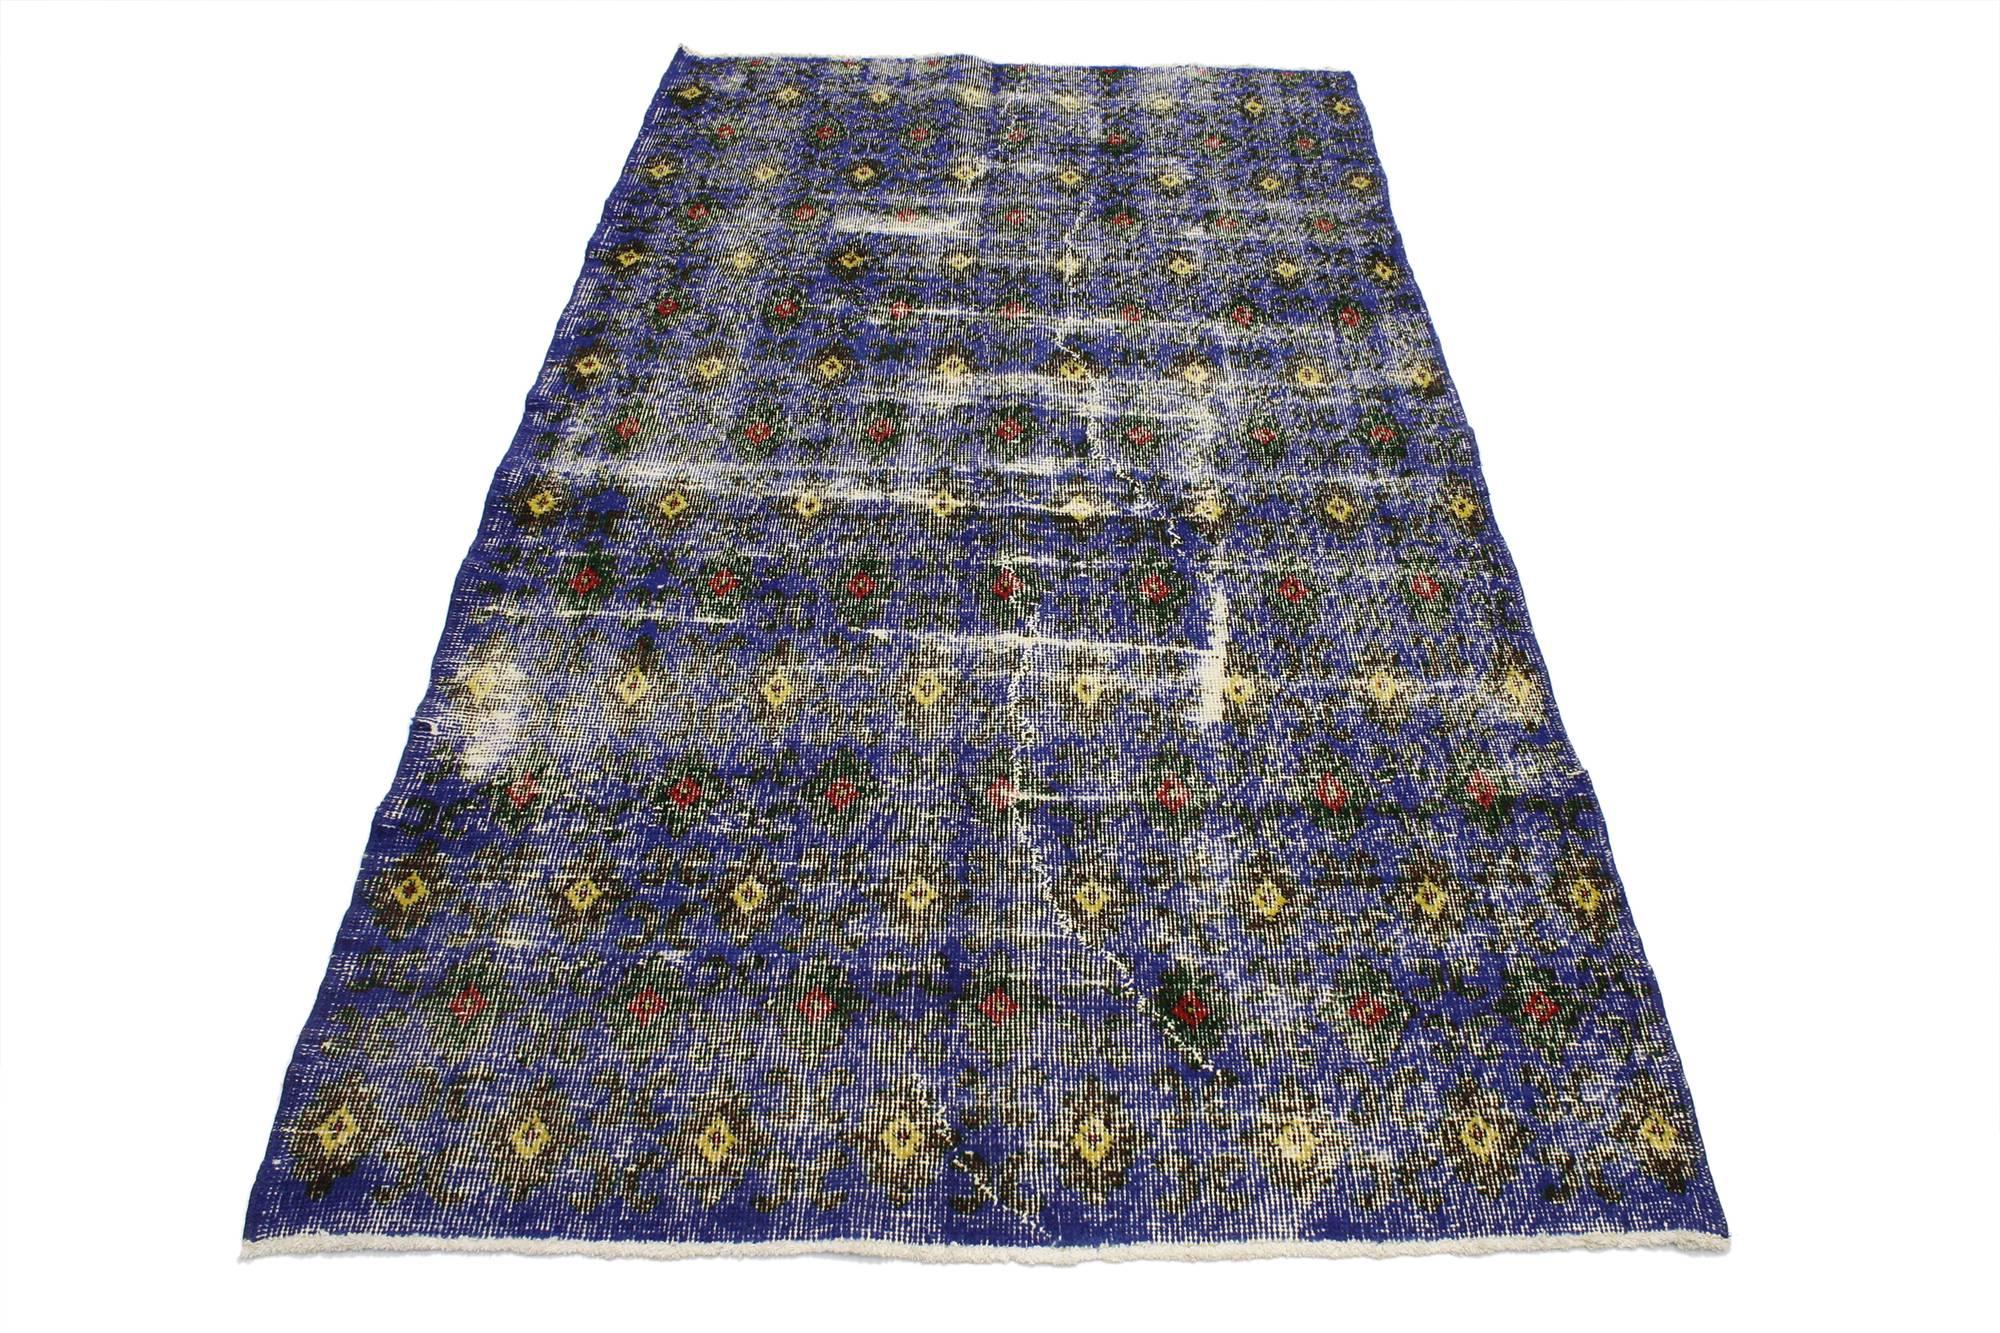 51954 Zeki Muren Distressed Vintage Turkish Sivas Rug with Rustic Art Deco Style. Warm and inviting combined with a bold pattern, this hand knotted wool distressed vintage Turkish Sivas rug embodies bold Art Deco style with a modern artisan twist.